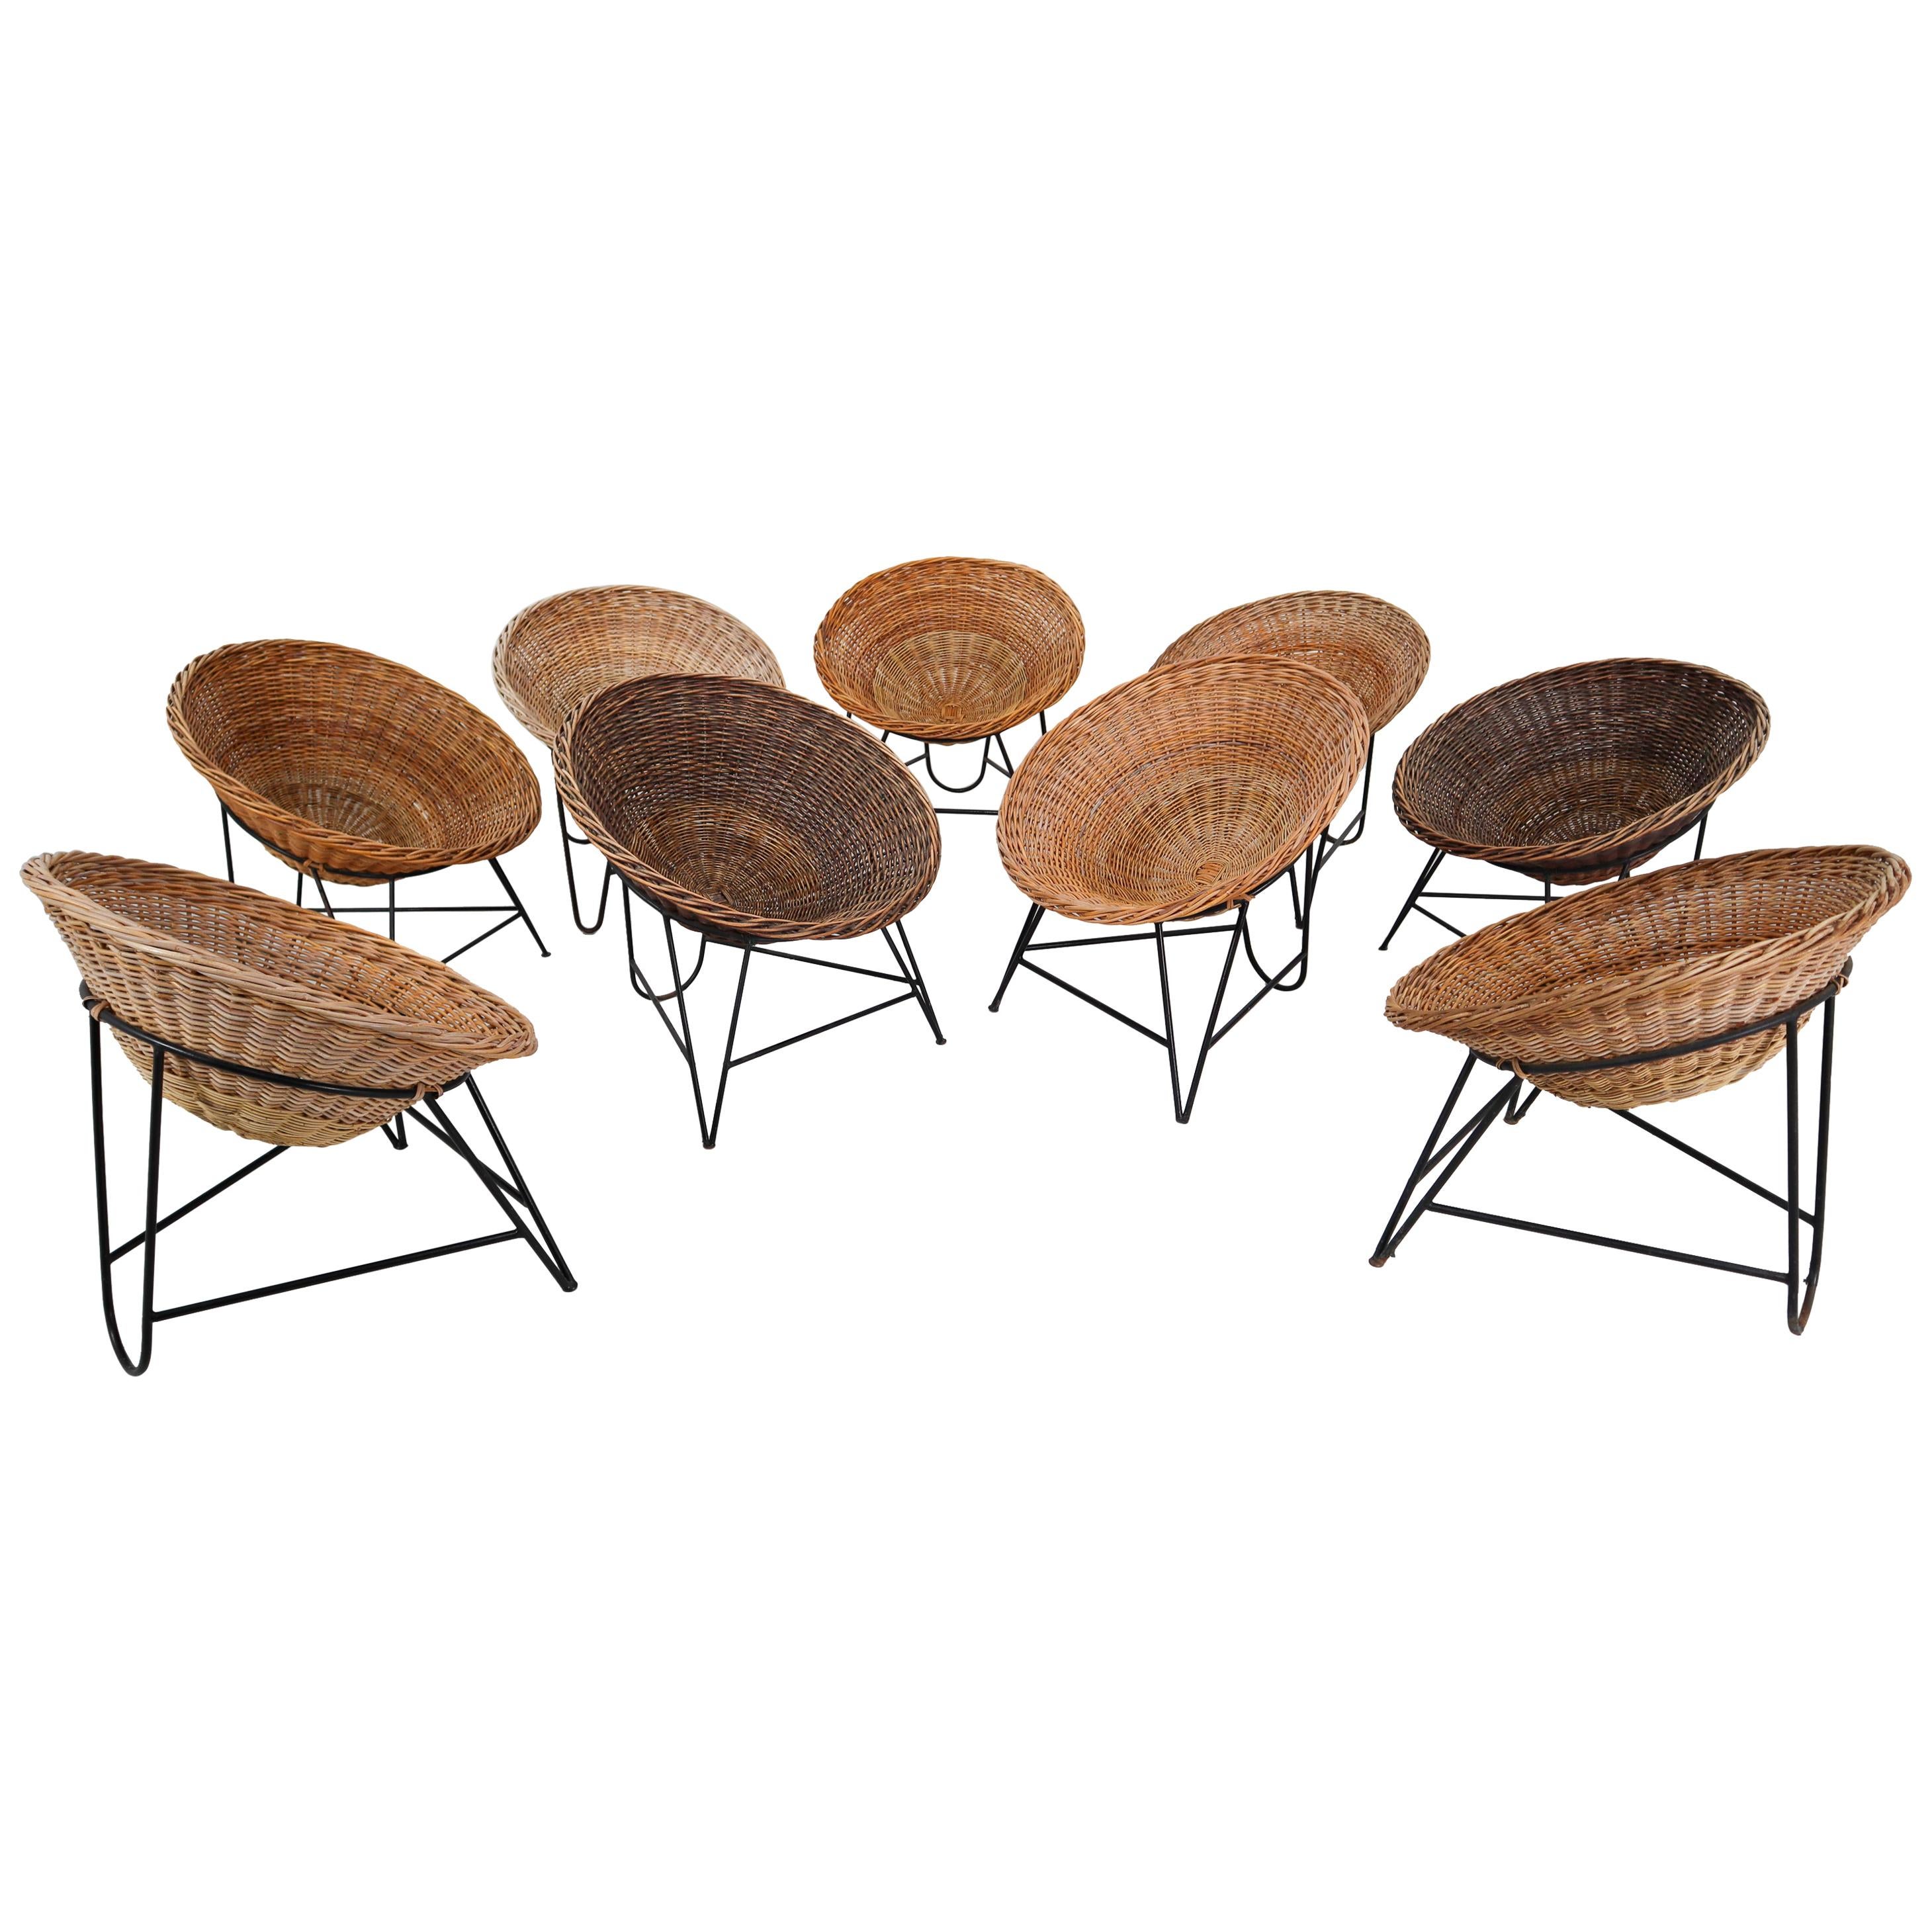 Midcentury Wicker Easy-Lounge-Patio Chair Designed in Europe, 1960s